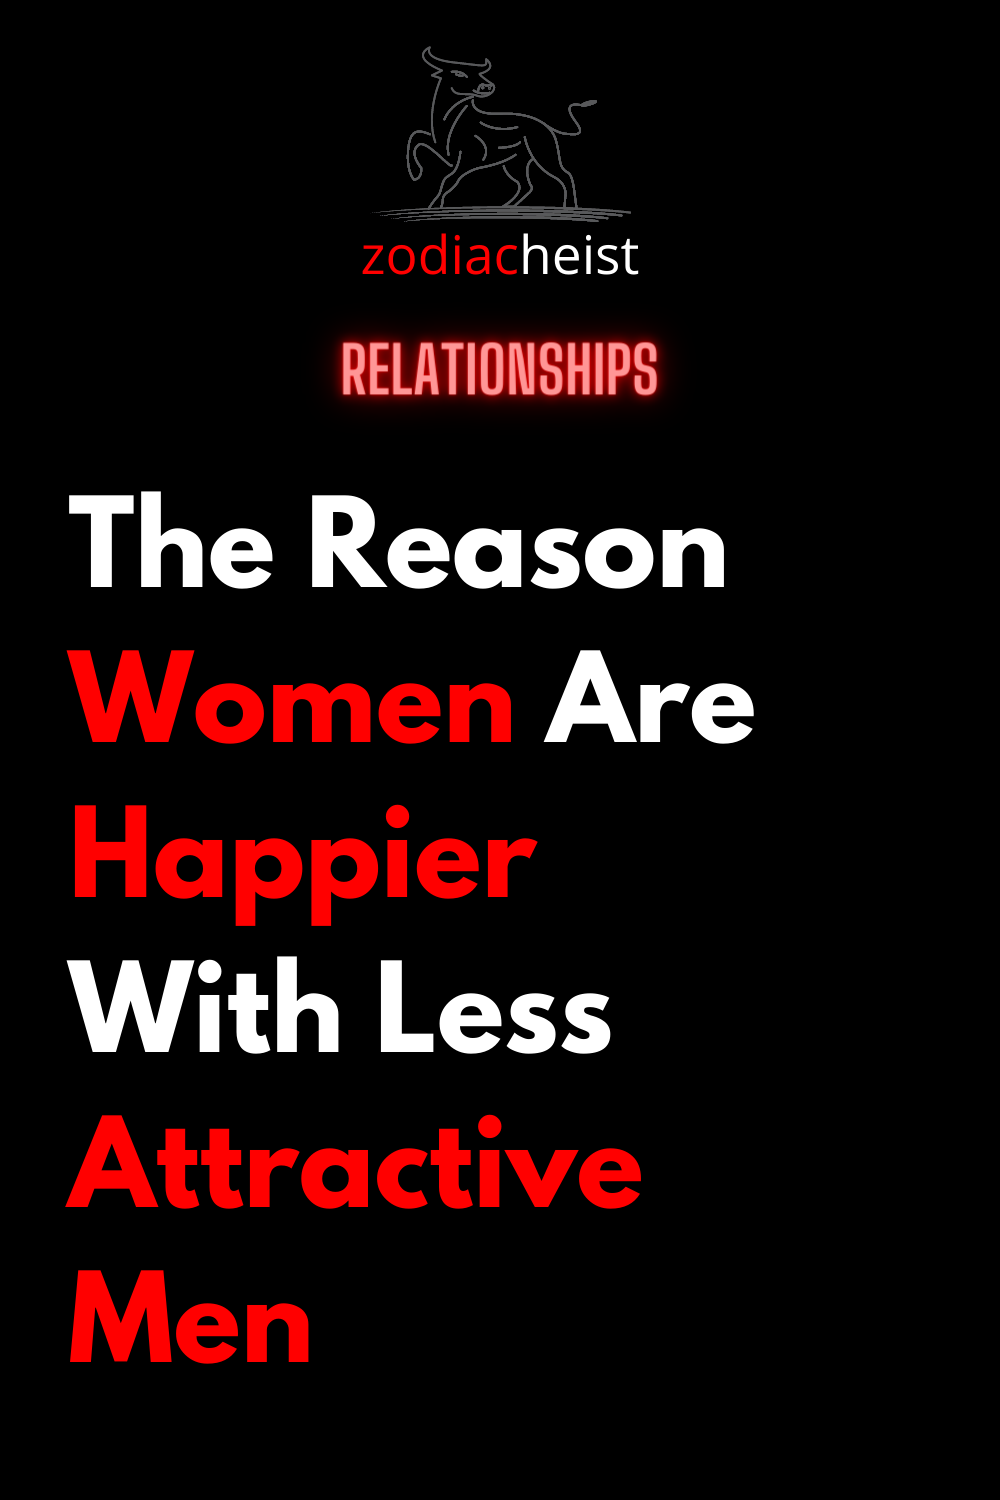 The Reason Women Are Happier With Less Attractive Men